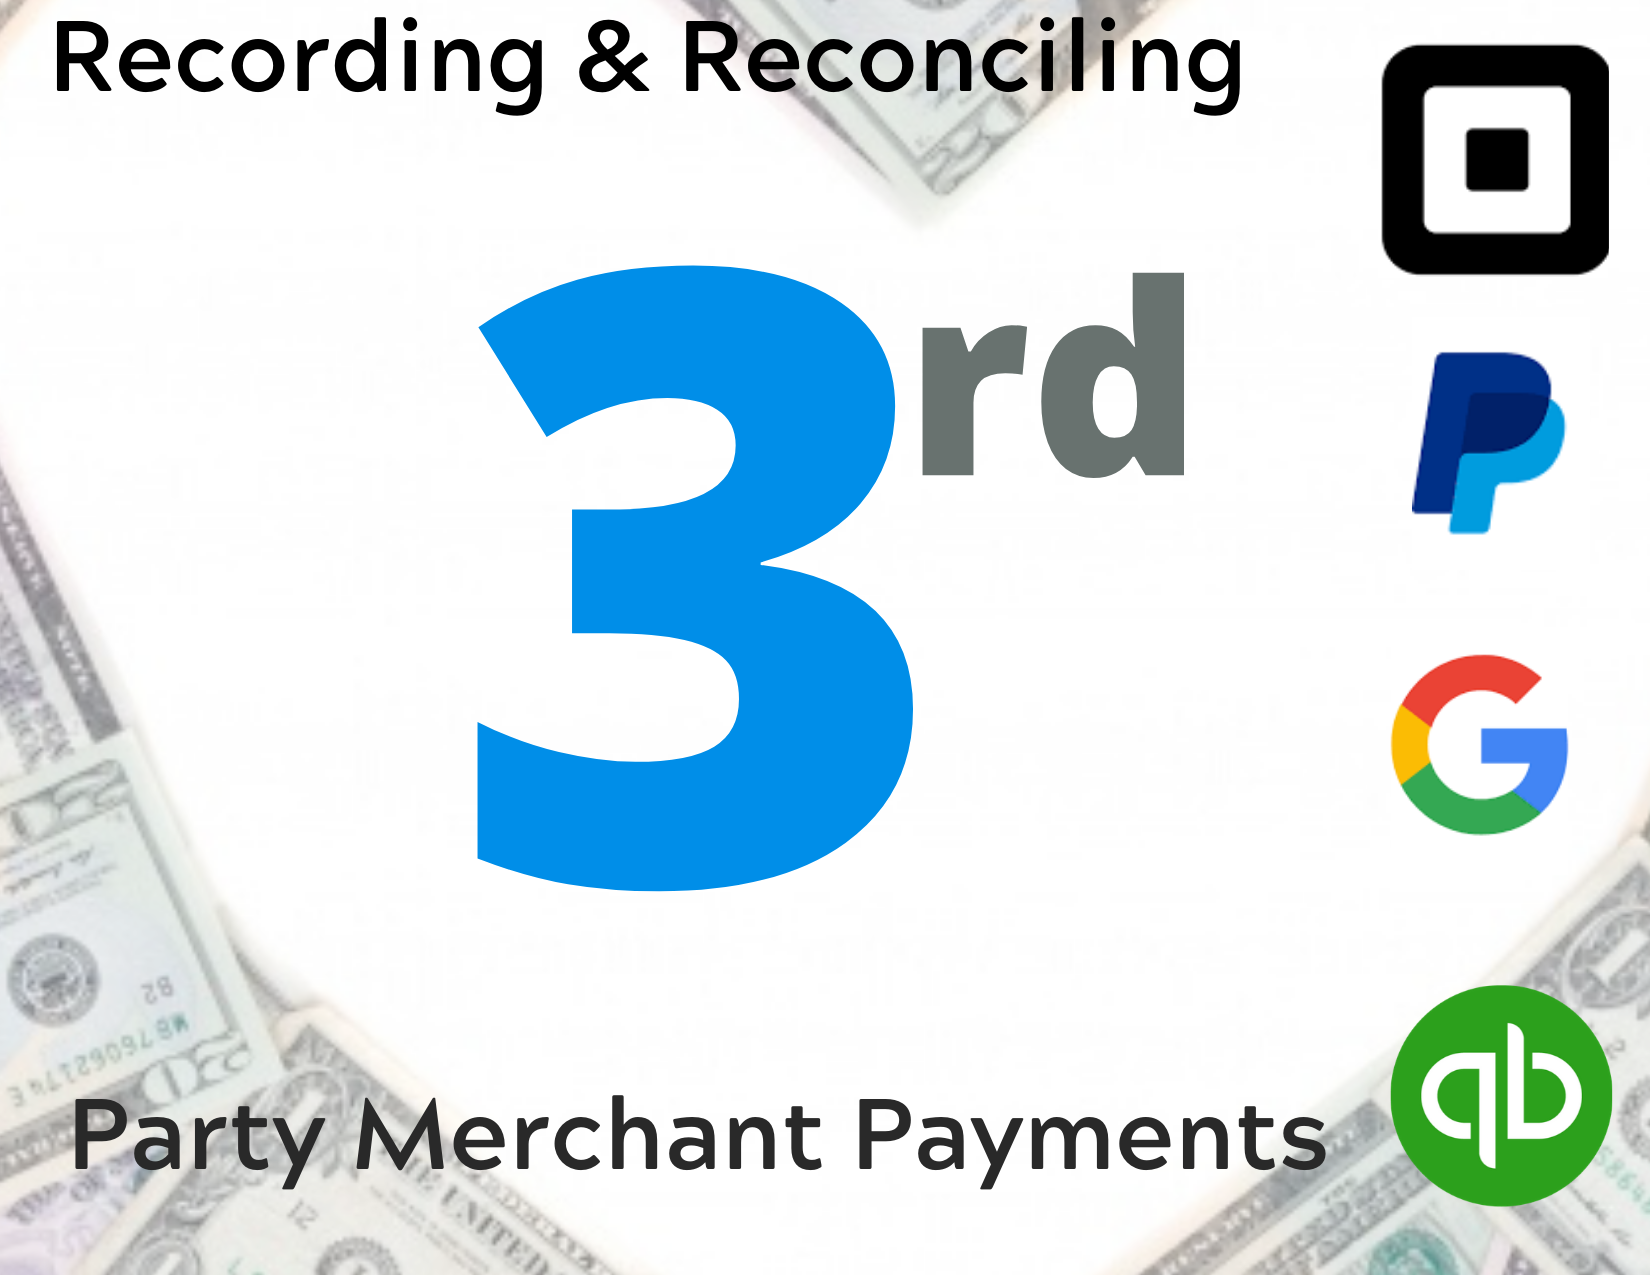 Recording & Reconciling 3rd Party Merchant Payments